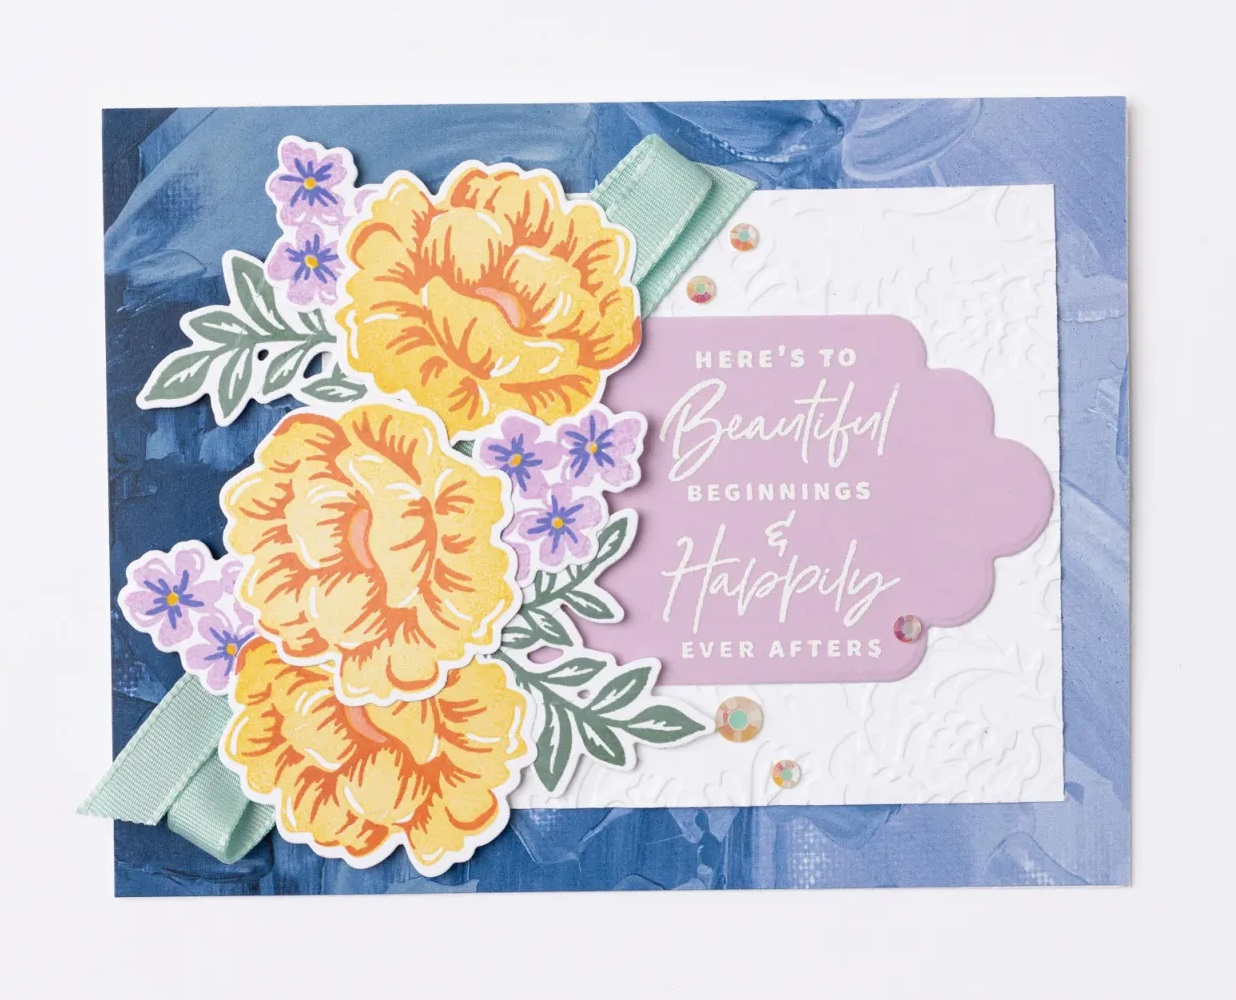 Tutorial Tuesday: Double Stamping Floral Decals with the ÜberChic Über Mat  - Adventures In Acetone